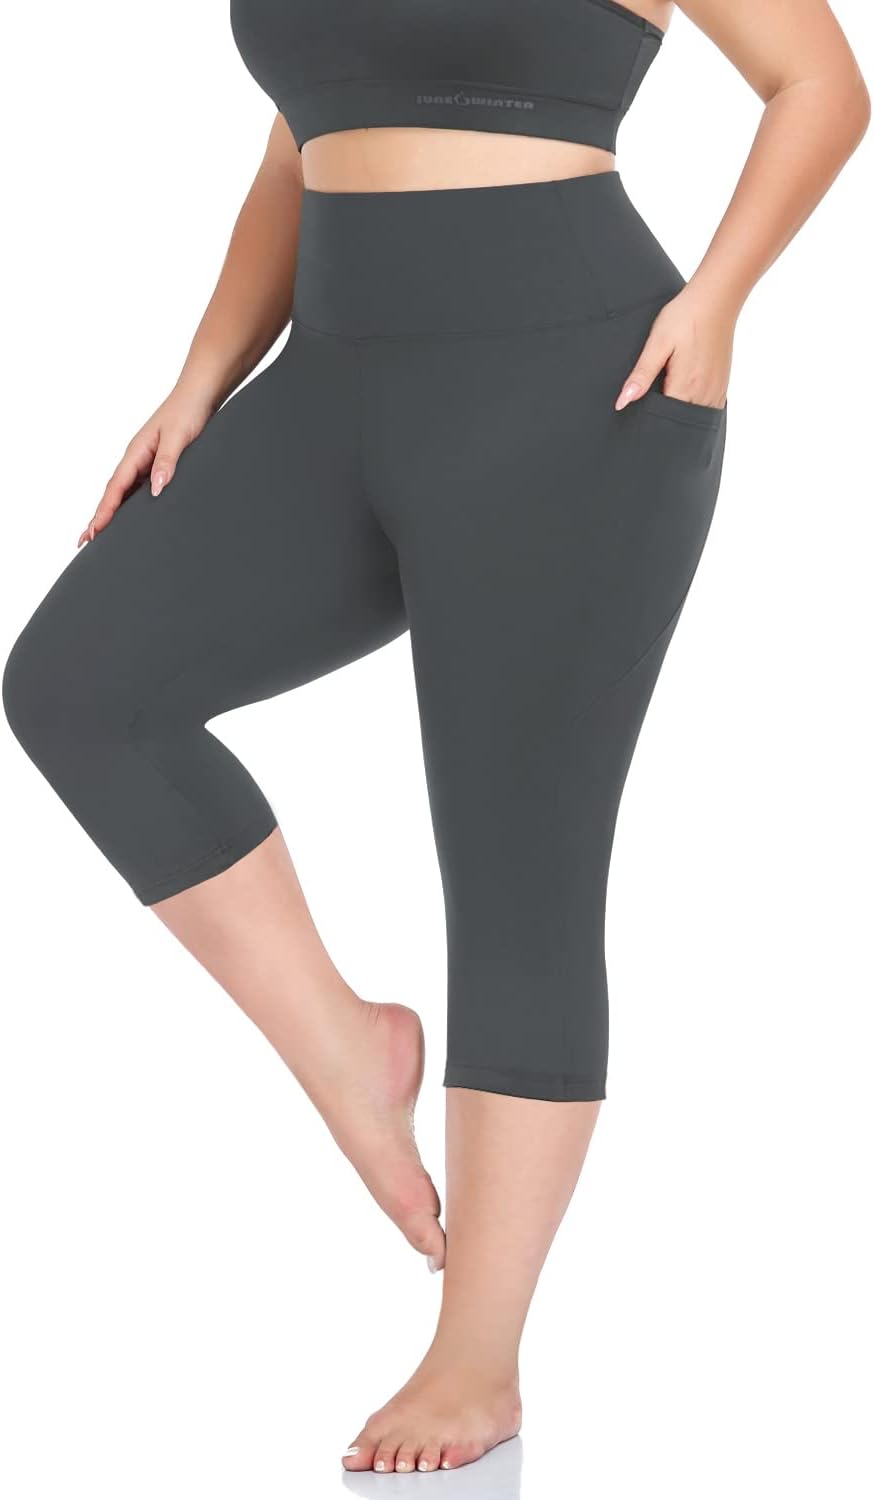 MOREFEEL Plus Size Leggings for Women with Pockets-Stretchy X-4XL Tummy Control High Waist Workout Black Yoga Pants